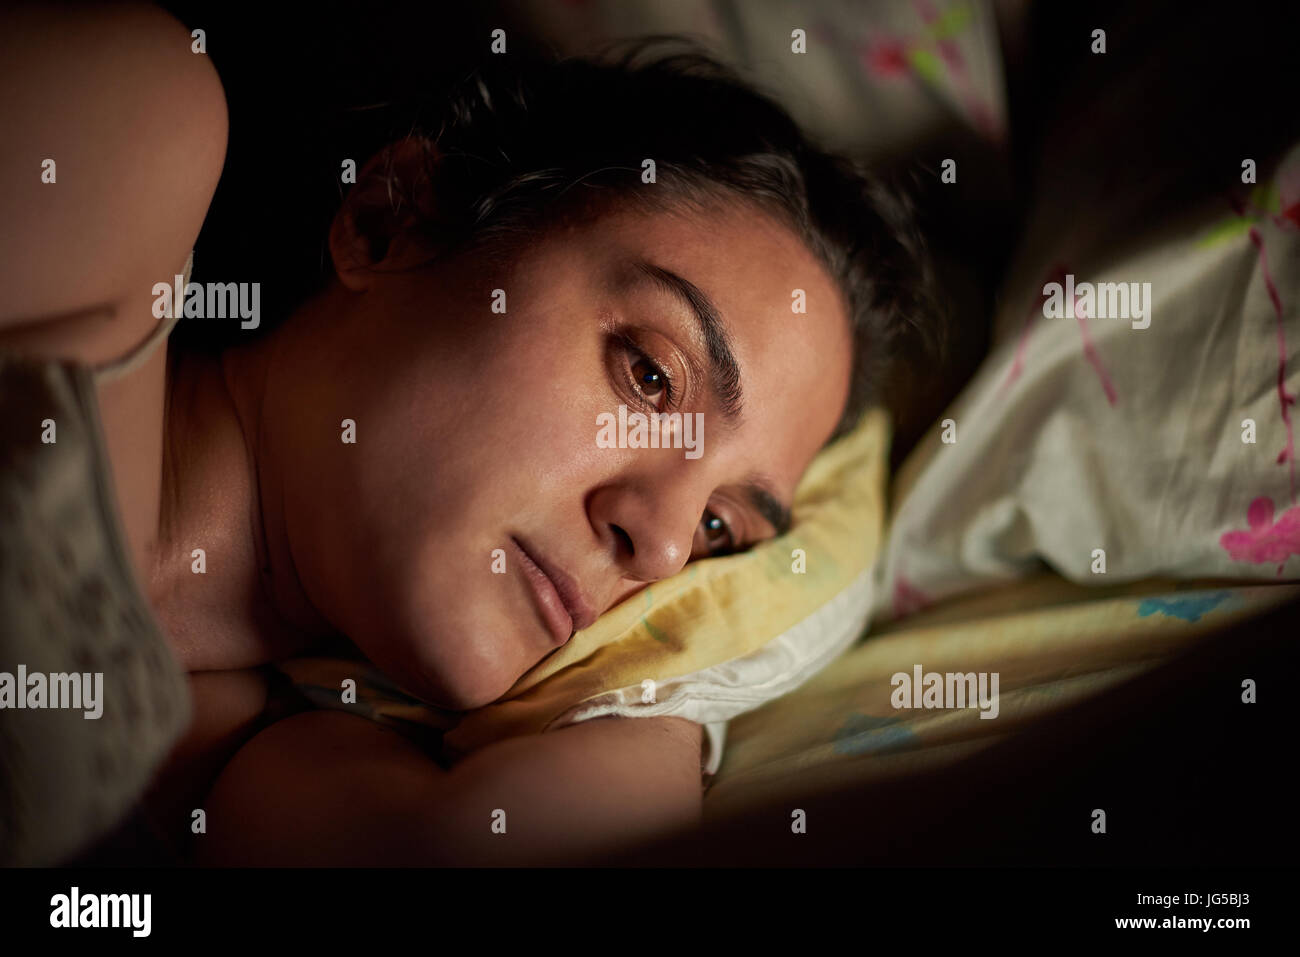 Portrait of young woman using tablet in bed. Girl reading from digital tablet at night Stock Photo